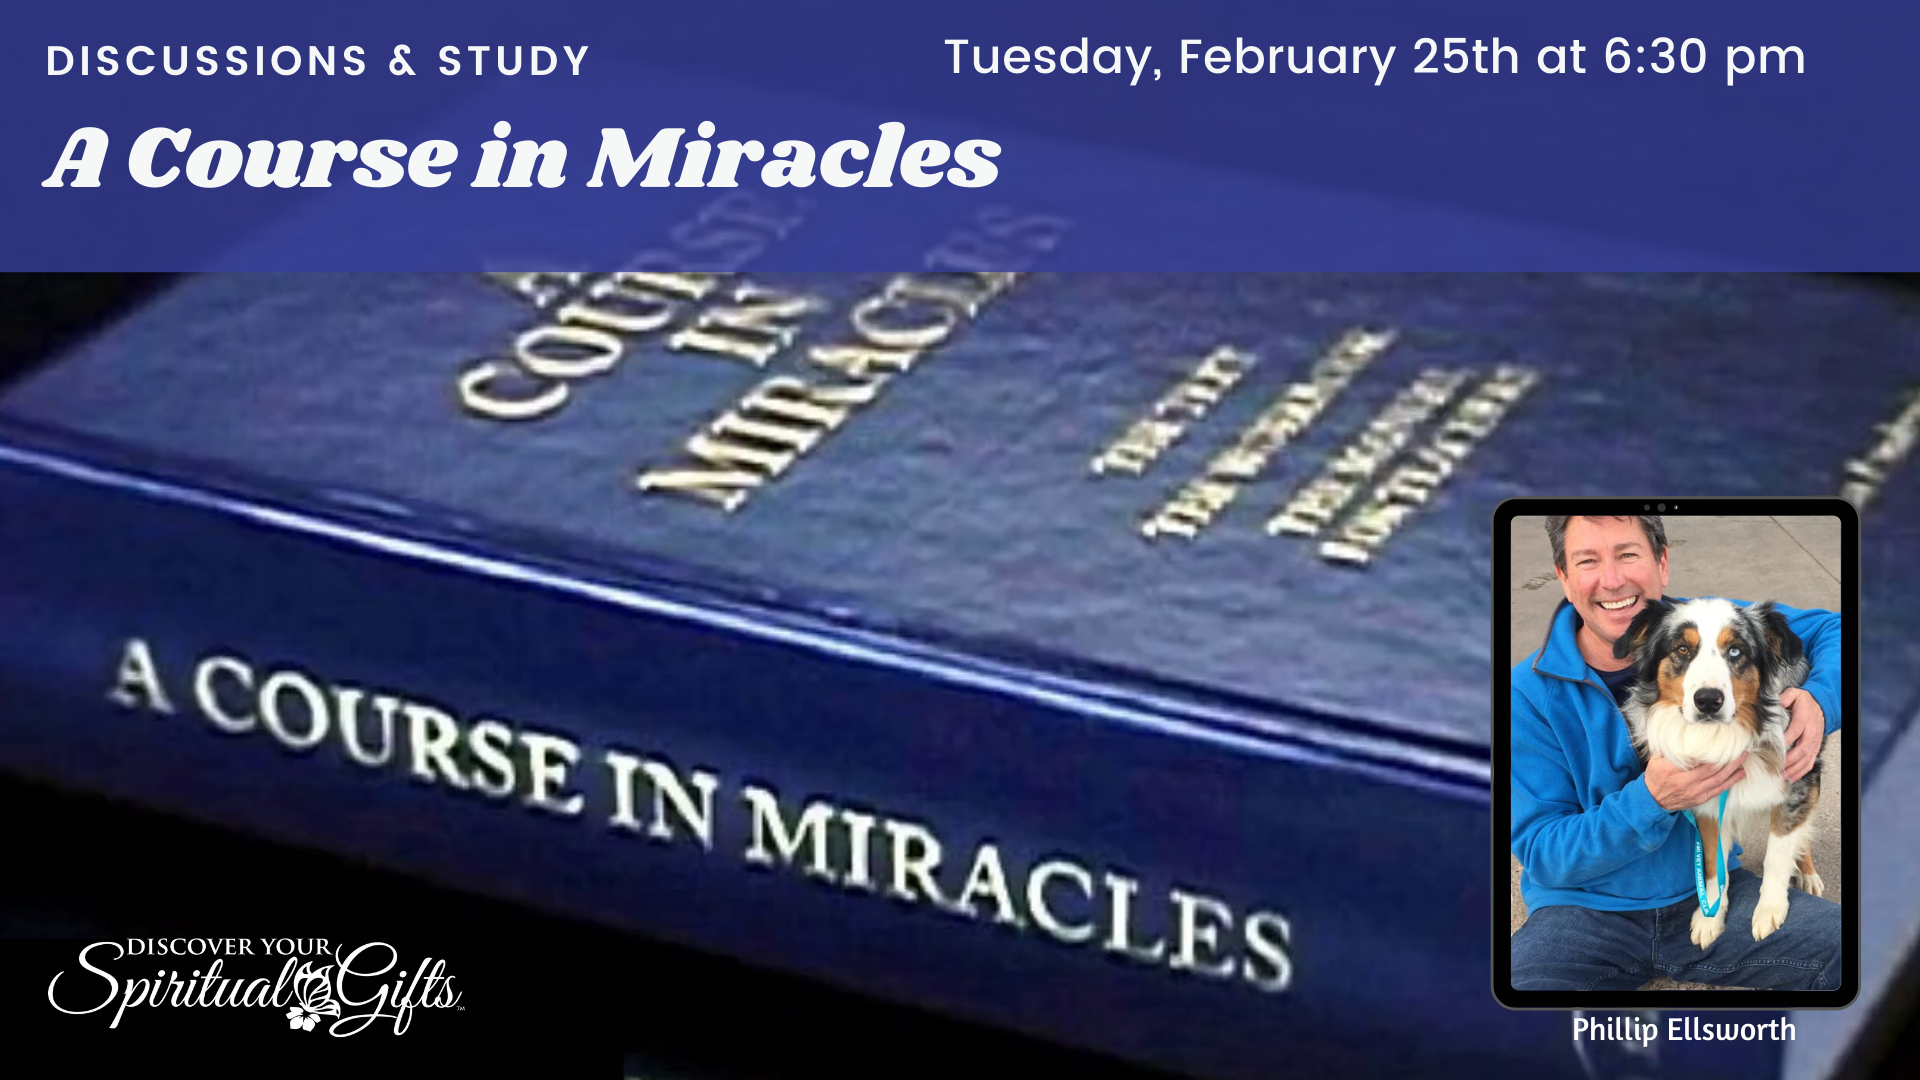 A Course in Miracles: Discussions & Study